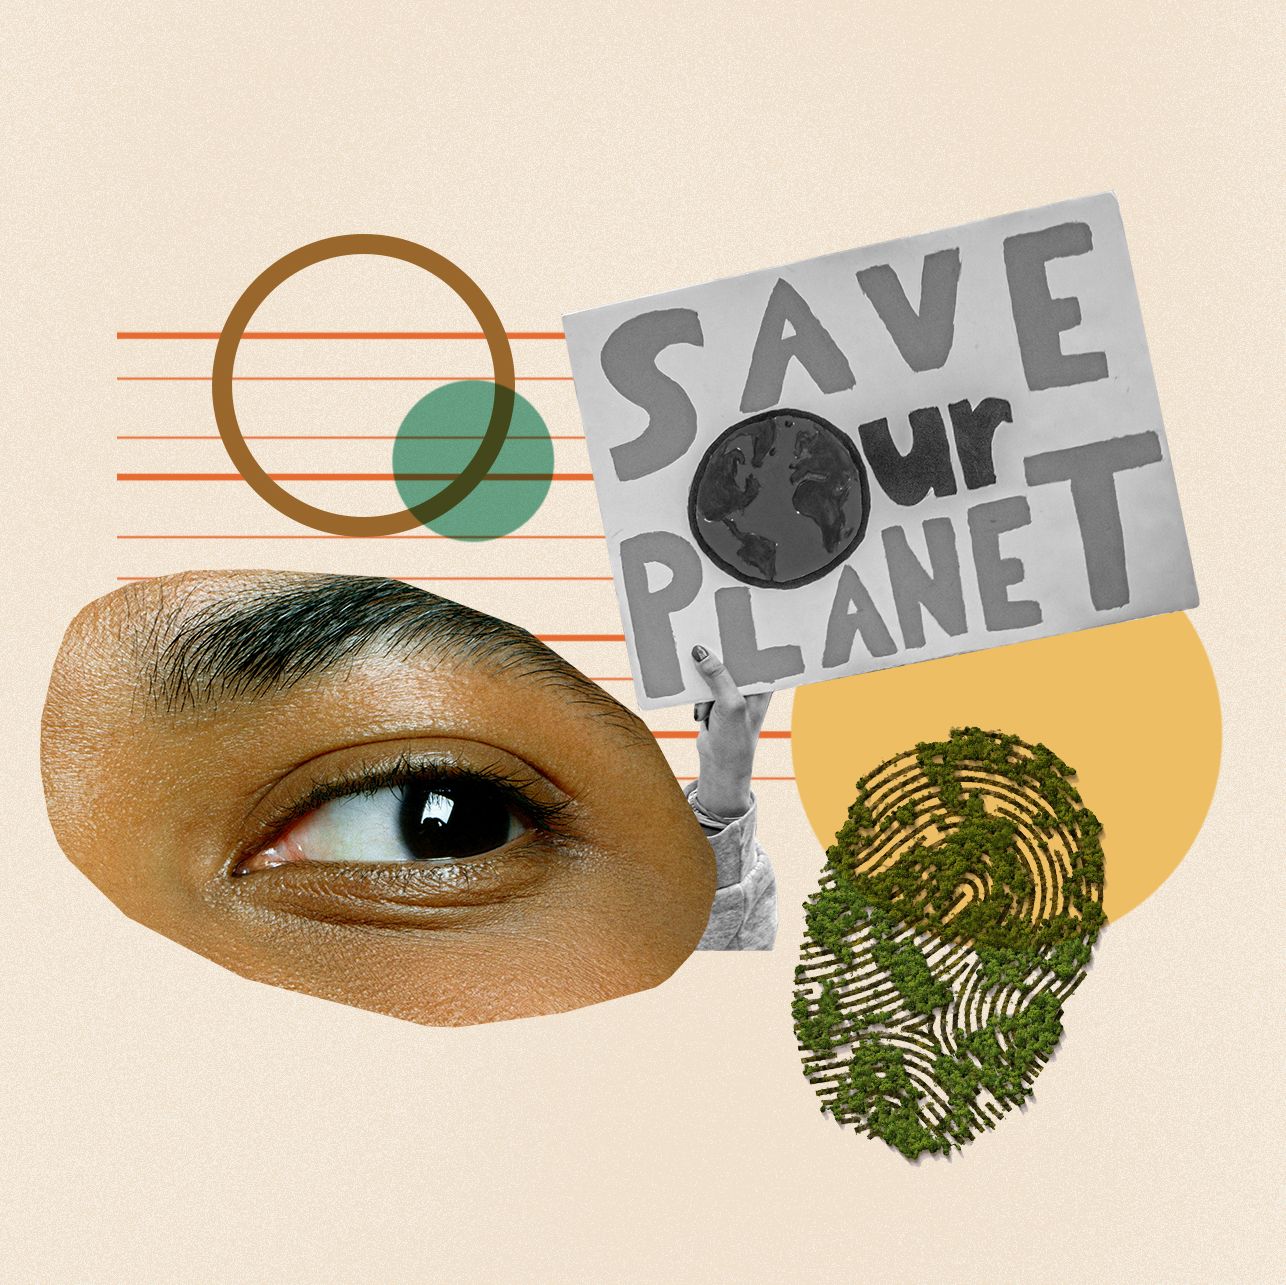 Understanding how environmental activists failed to prioritize communities of color will help us build a more inclusive movement, and planet, moving forward.